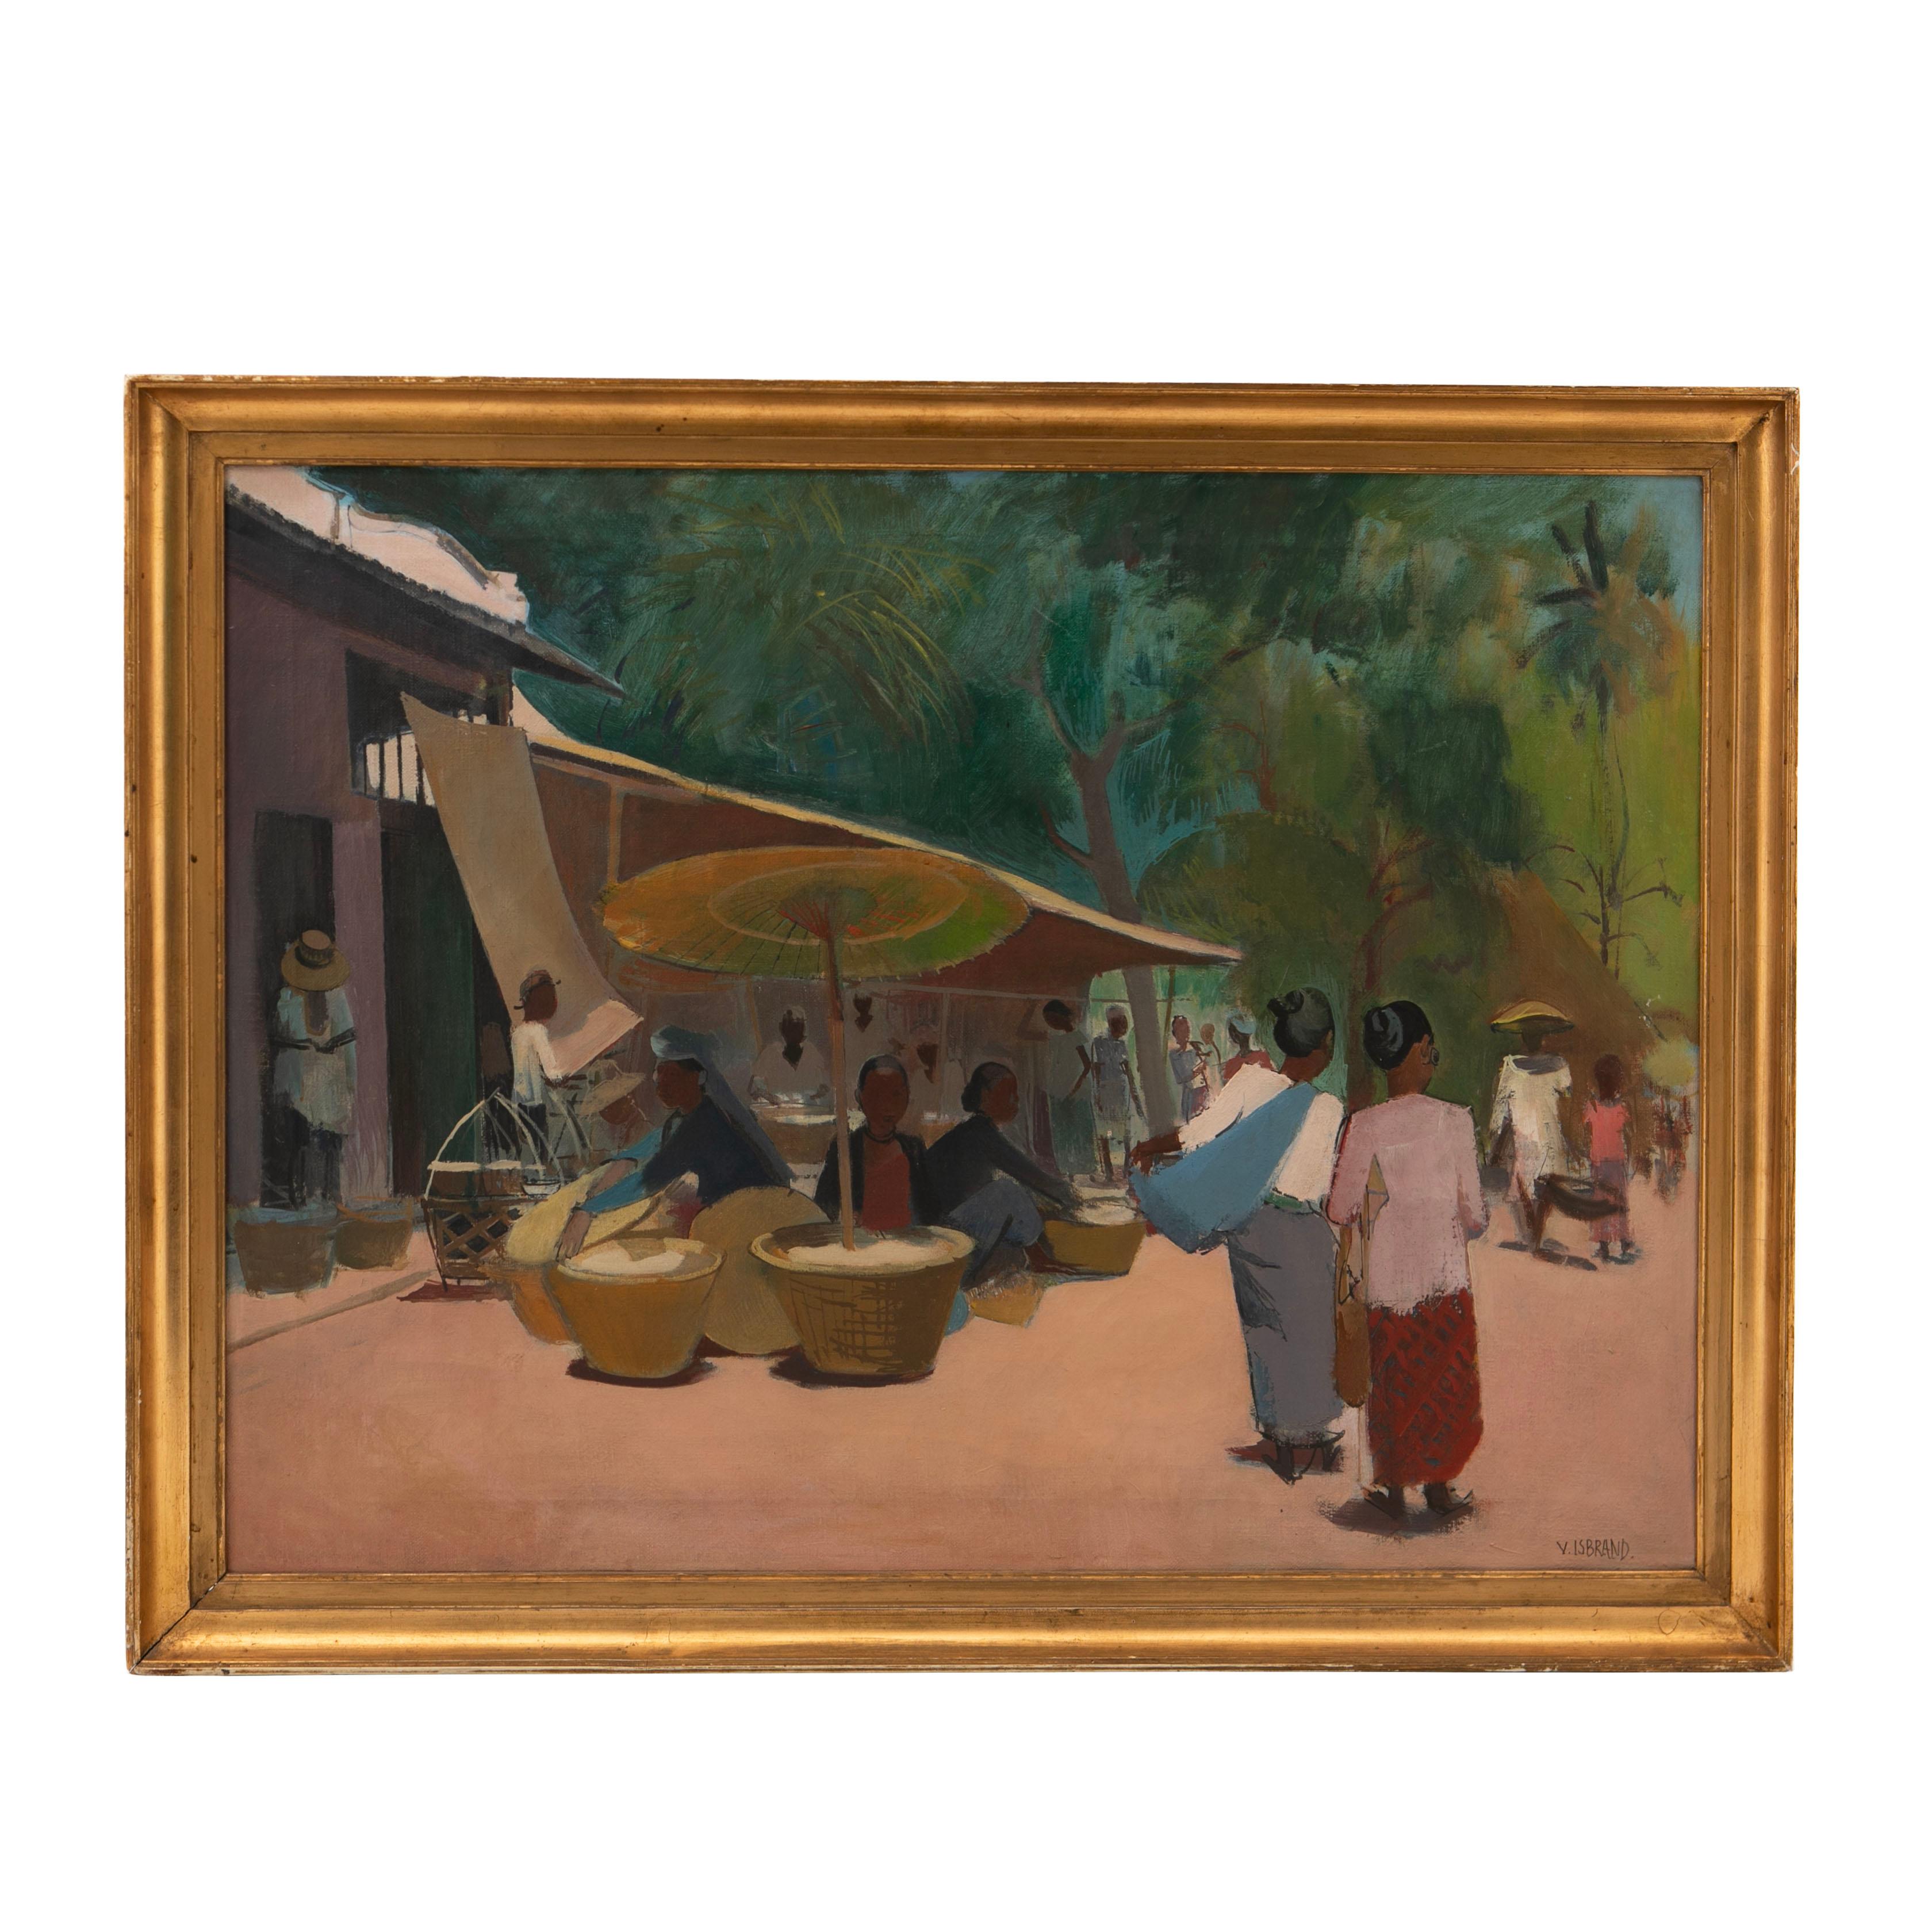 Victor Isbrand (Danish, 1897-1989)
Javanese market, oil on canvas.
Frame size (cm):60 x 79 x 5  Artwork size: 52 x 70
Signed V. Isbrand in the lower right corner and on the flip size of the frame.
Purworejo Java, Indonesia 1921

Frame: 60 x 79 x